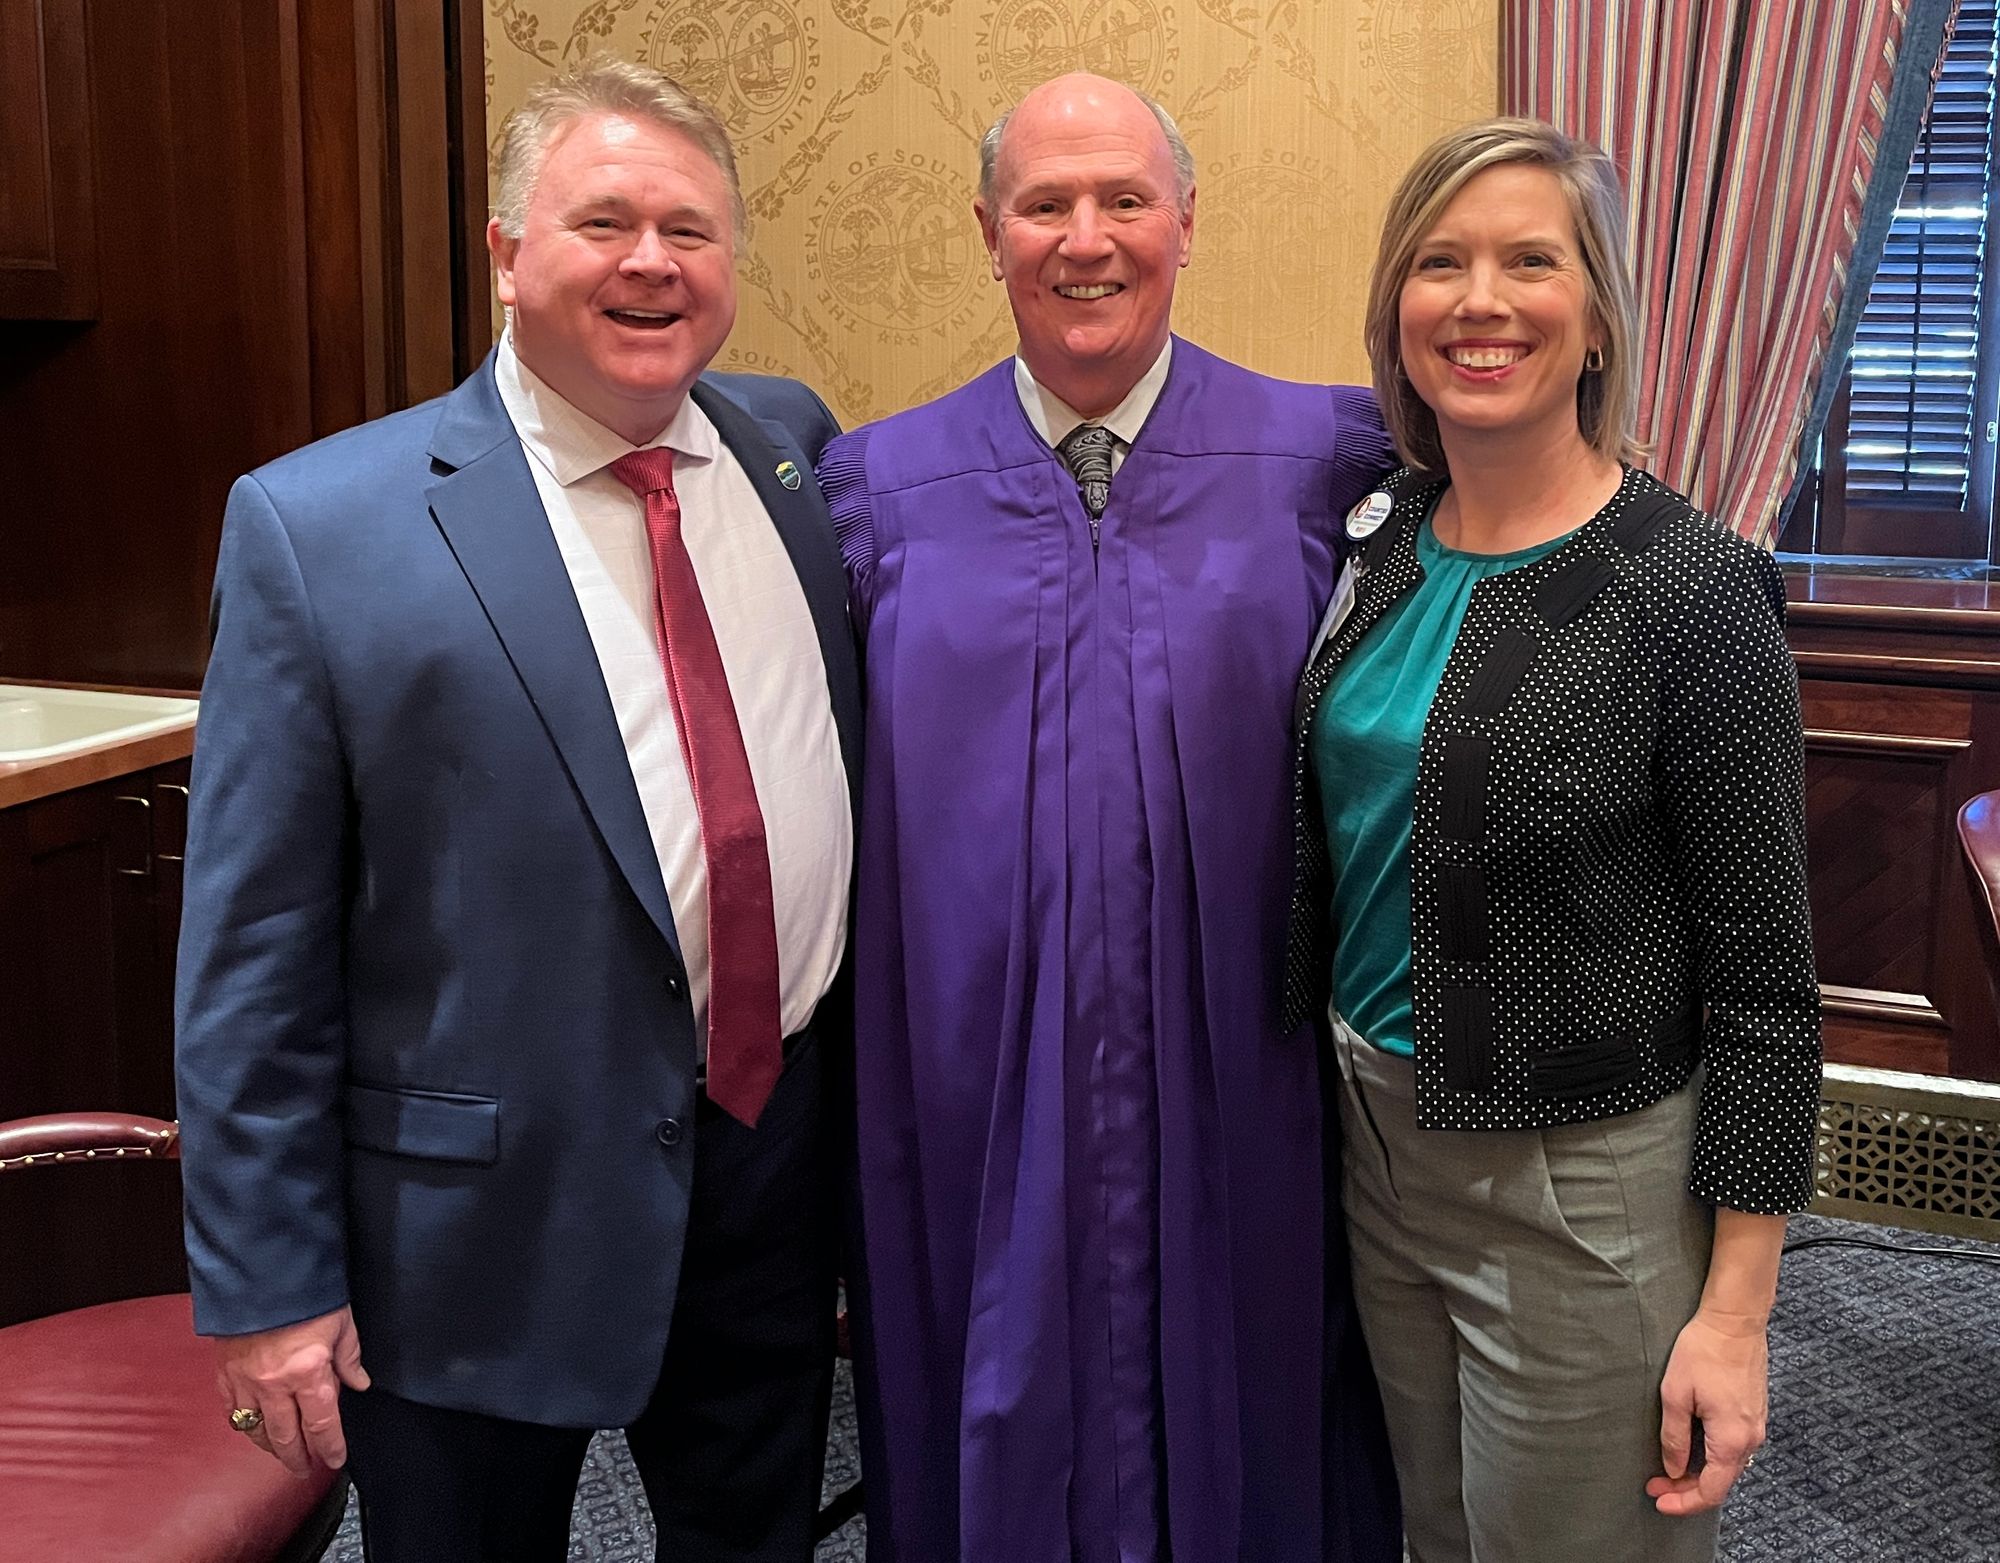 SCAC President Roy Costner III, SC Senate President Thomas Alexander and Pickens County Councilwoman Claiborne Linvill pose for a photo at the South Carolina State House.